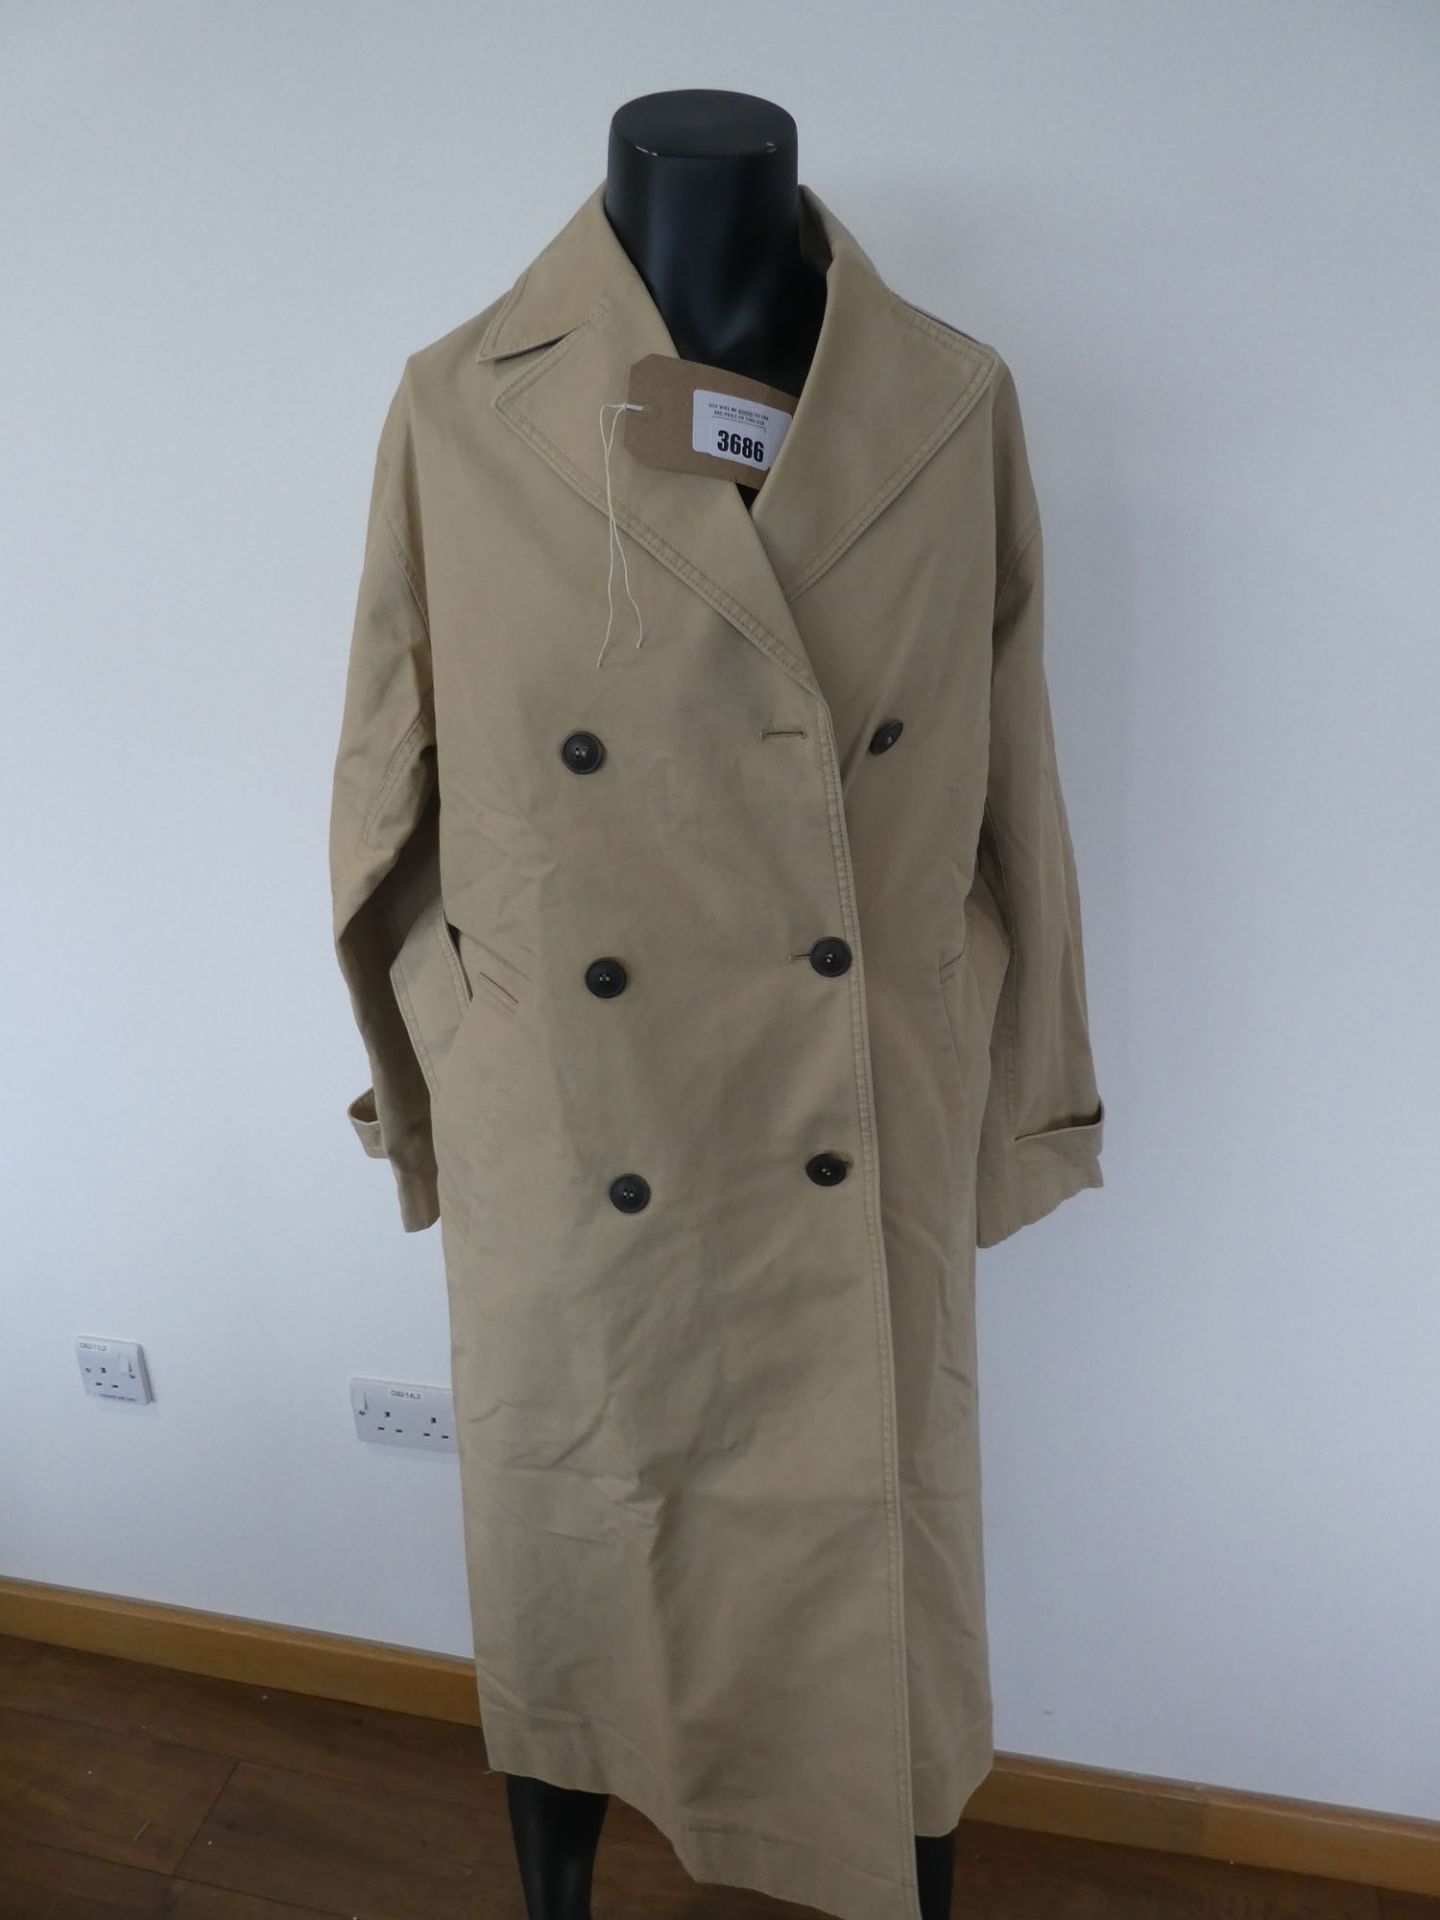 Stockholm Atelier & Other Stories trench jacket in beige size Small